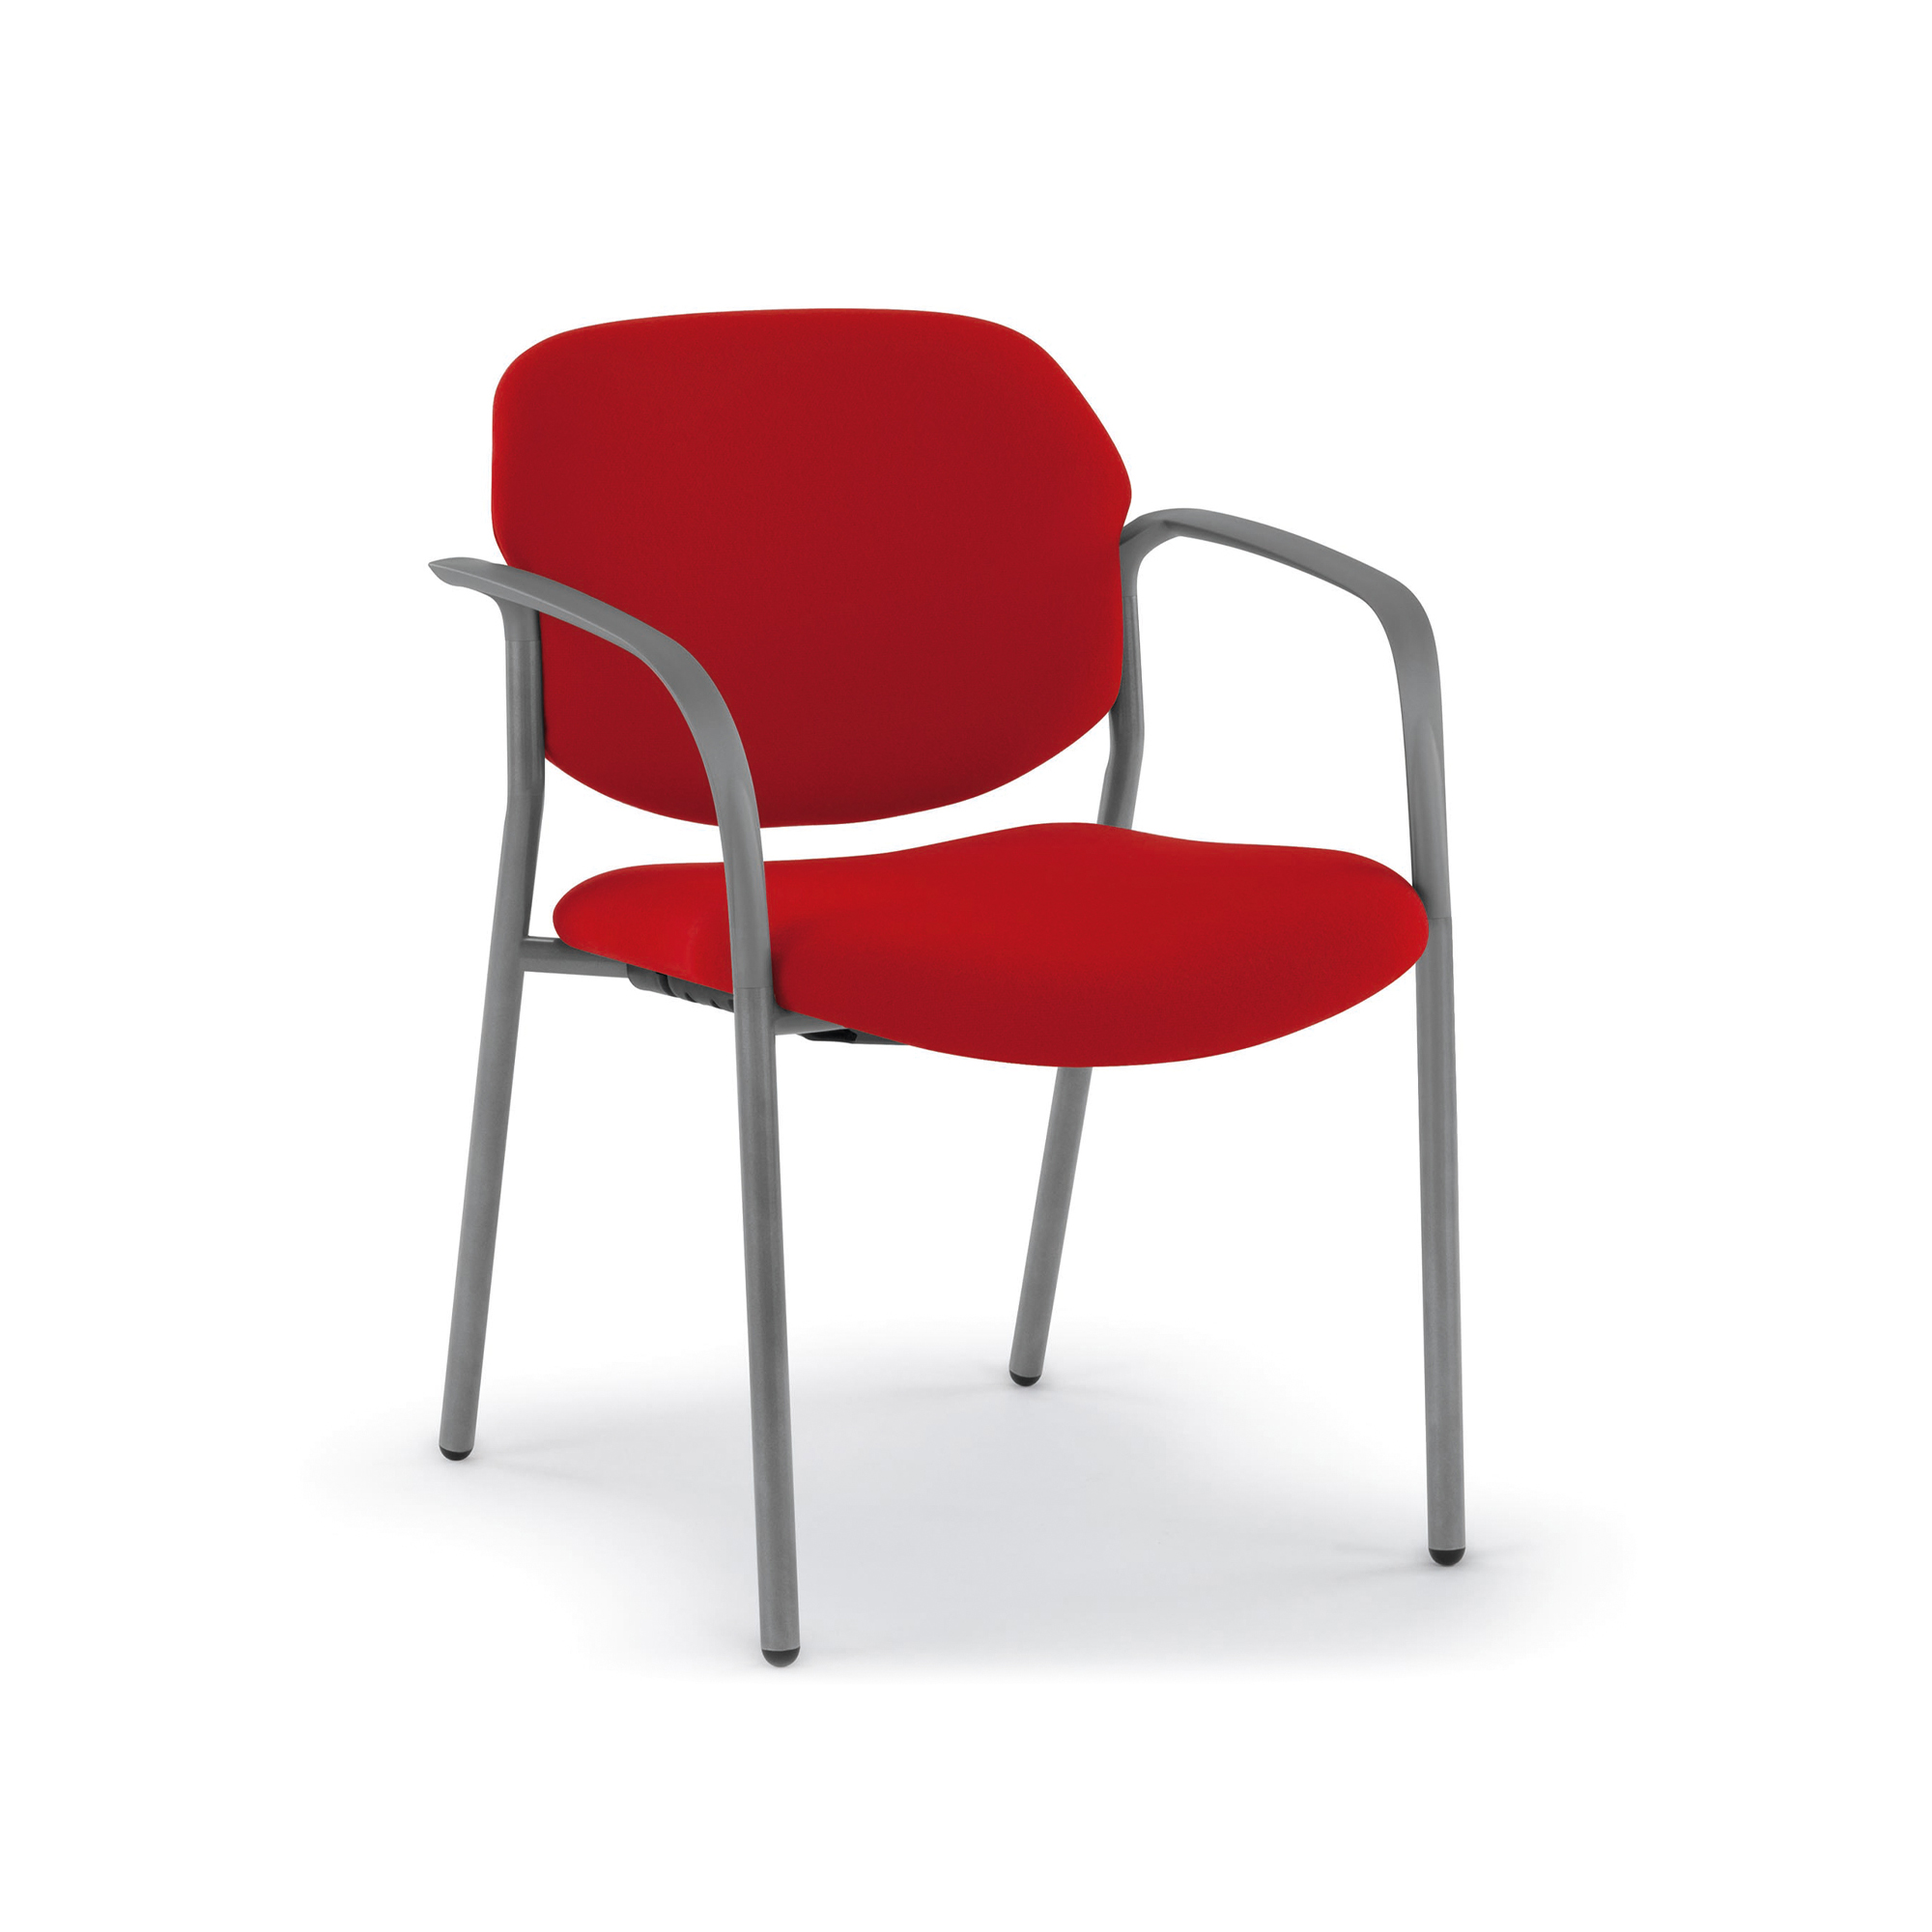 Chance Guest Chair, Silver Arms and Frame, Glides